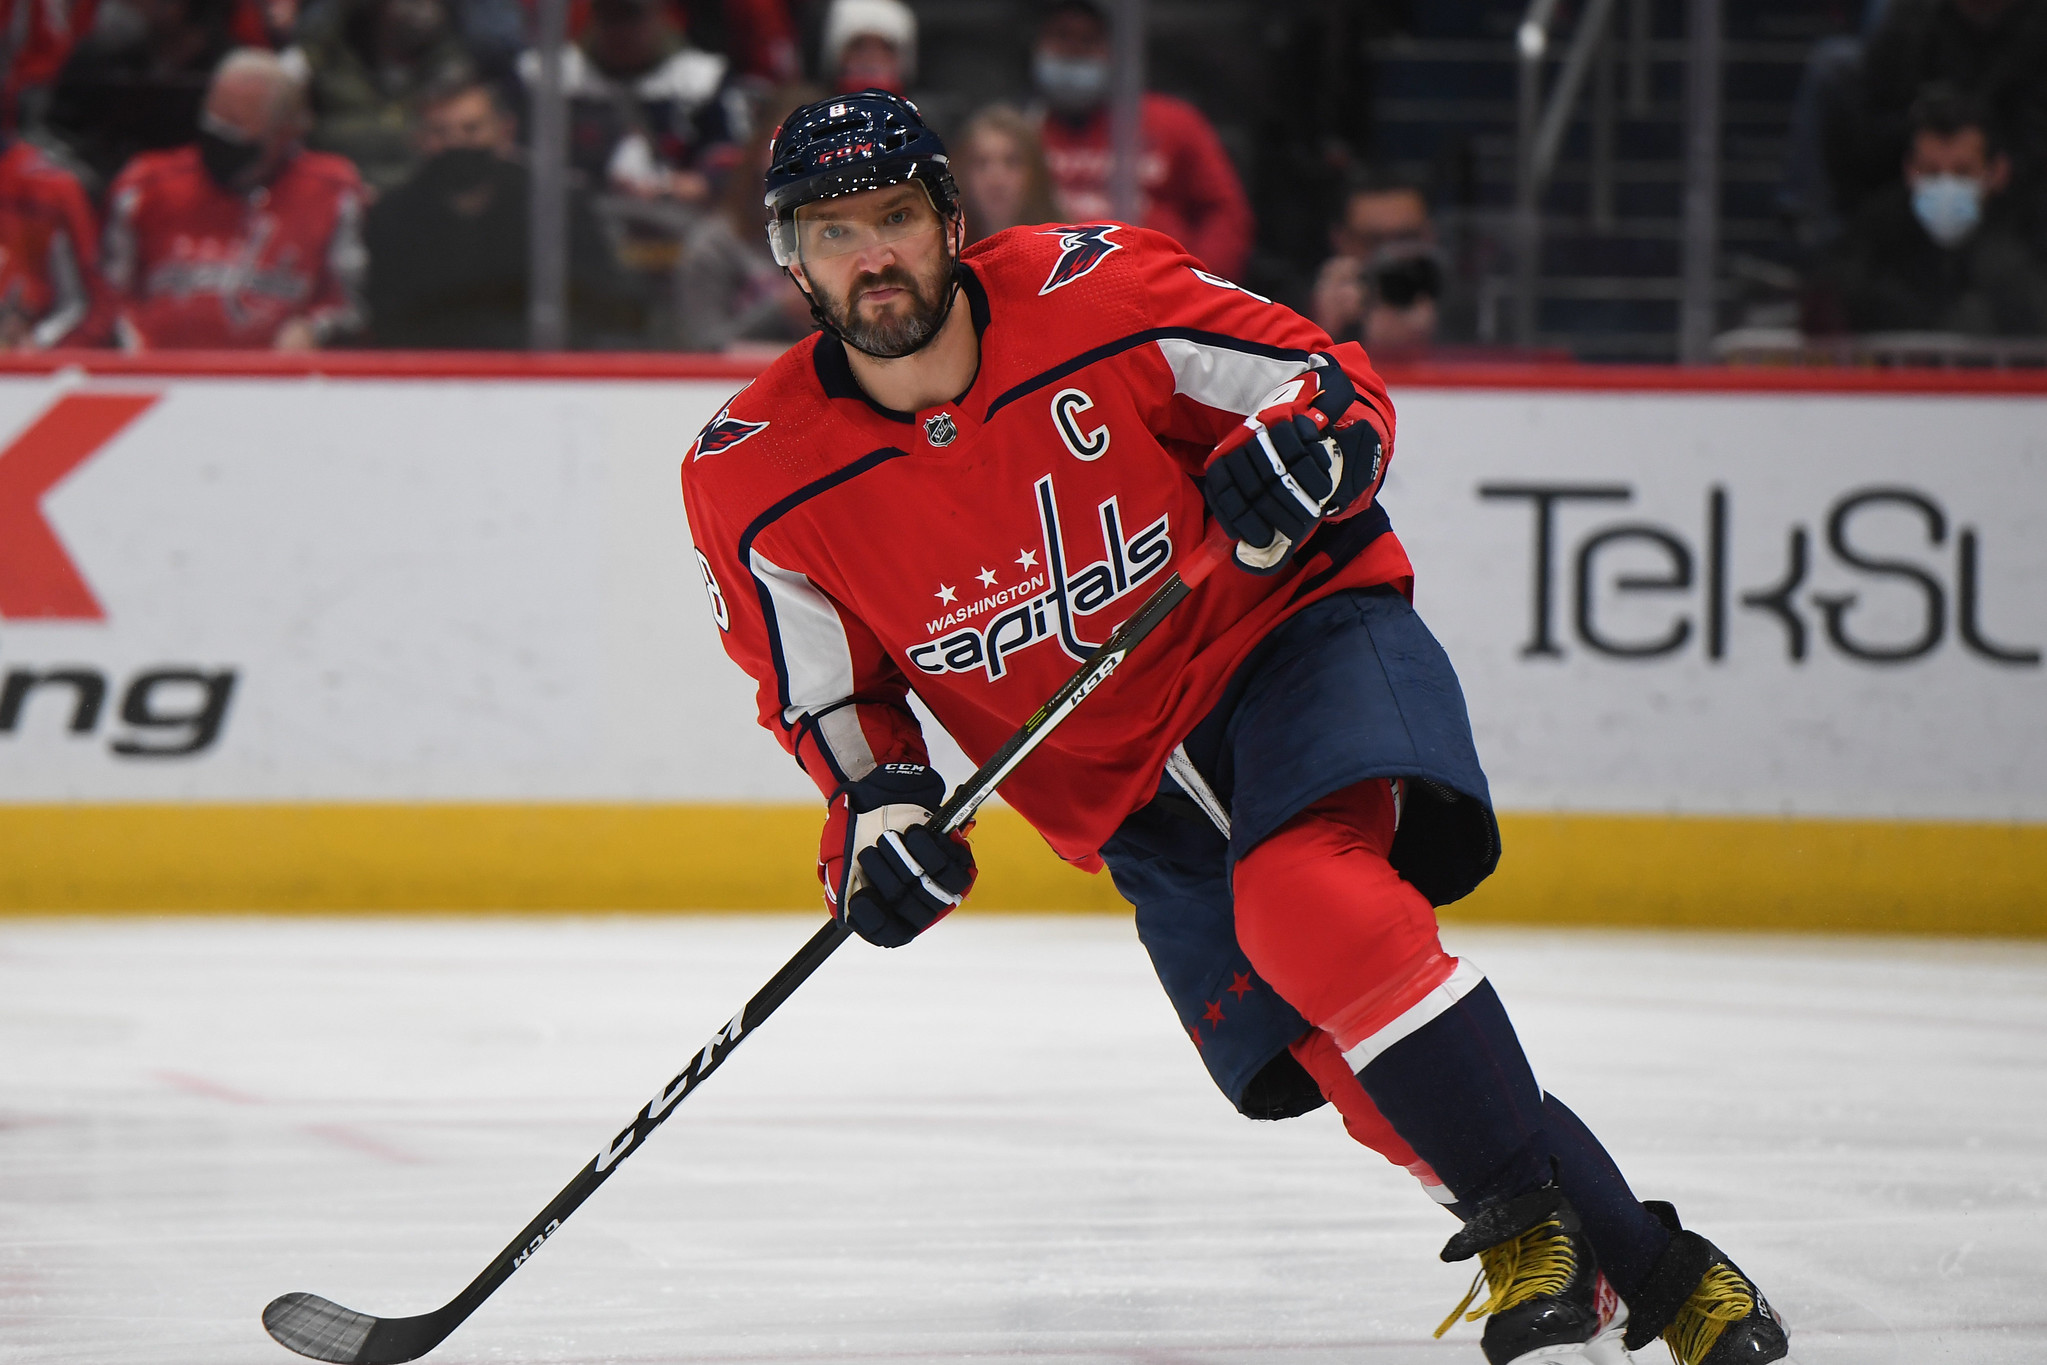 Alex Ovechkin is now 2nd all-time in NHL career goals, trails only Wayne  Gretzky's record